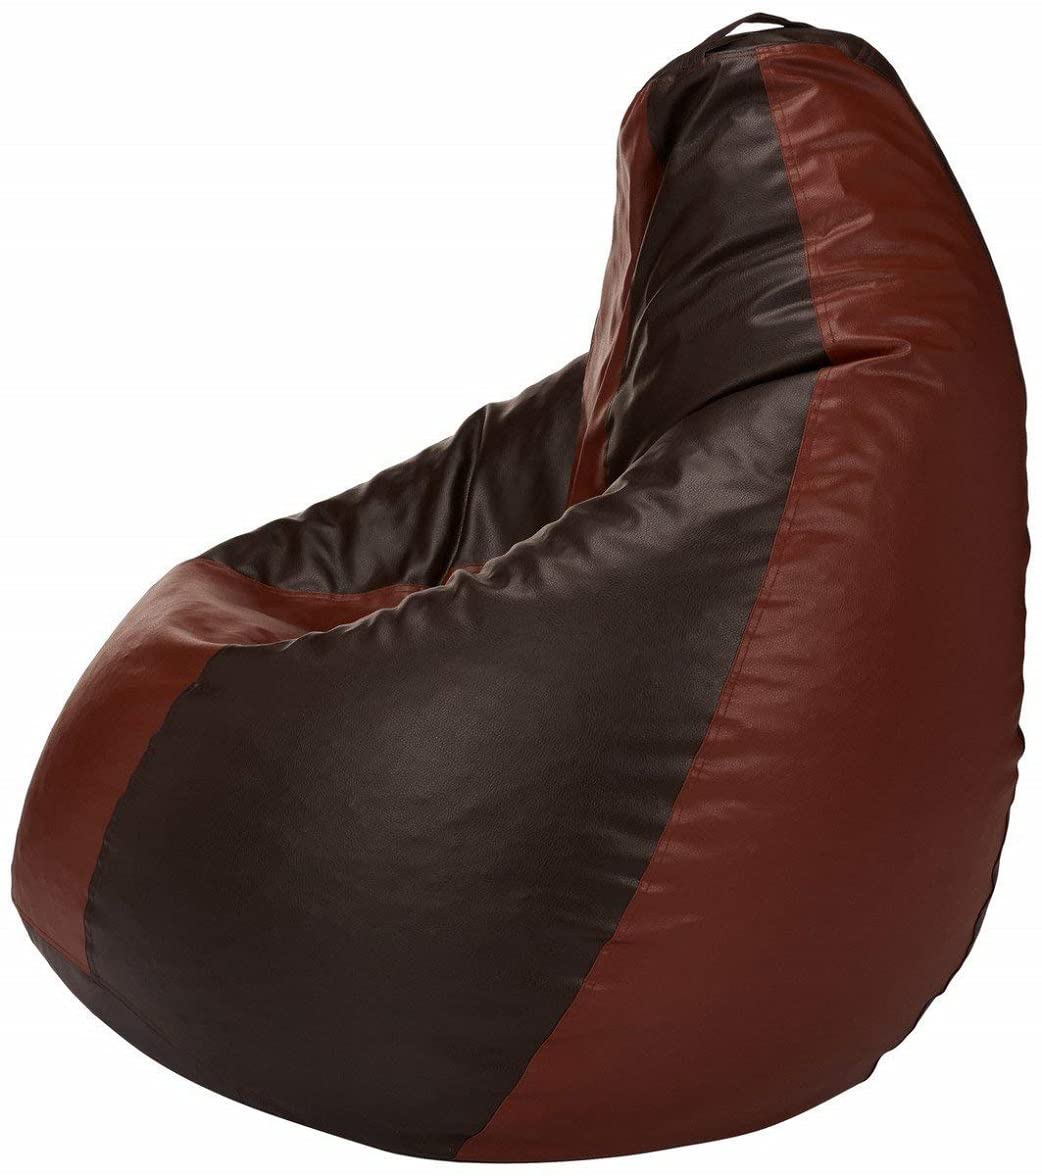 HDC Super Lama Leather Bean Bag Cover Without Beans (Brown & Tan) - HDC.IN